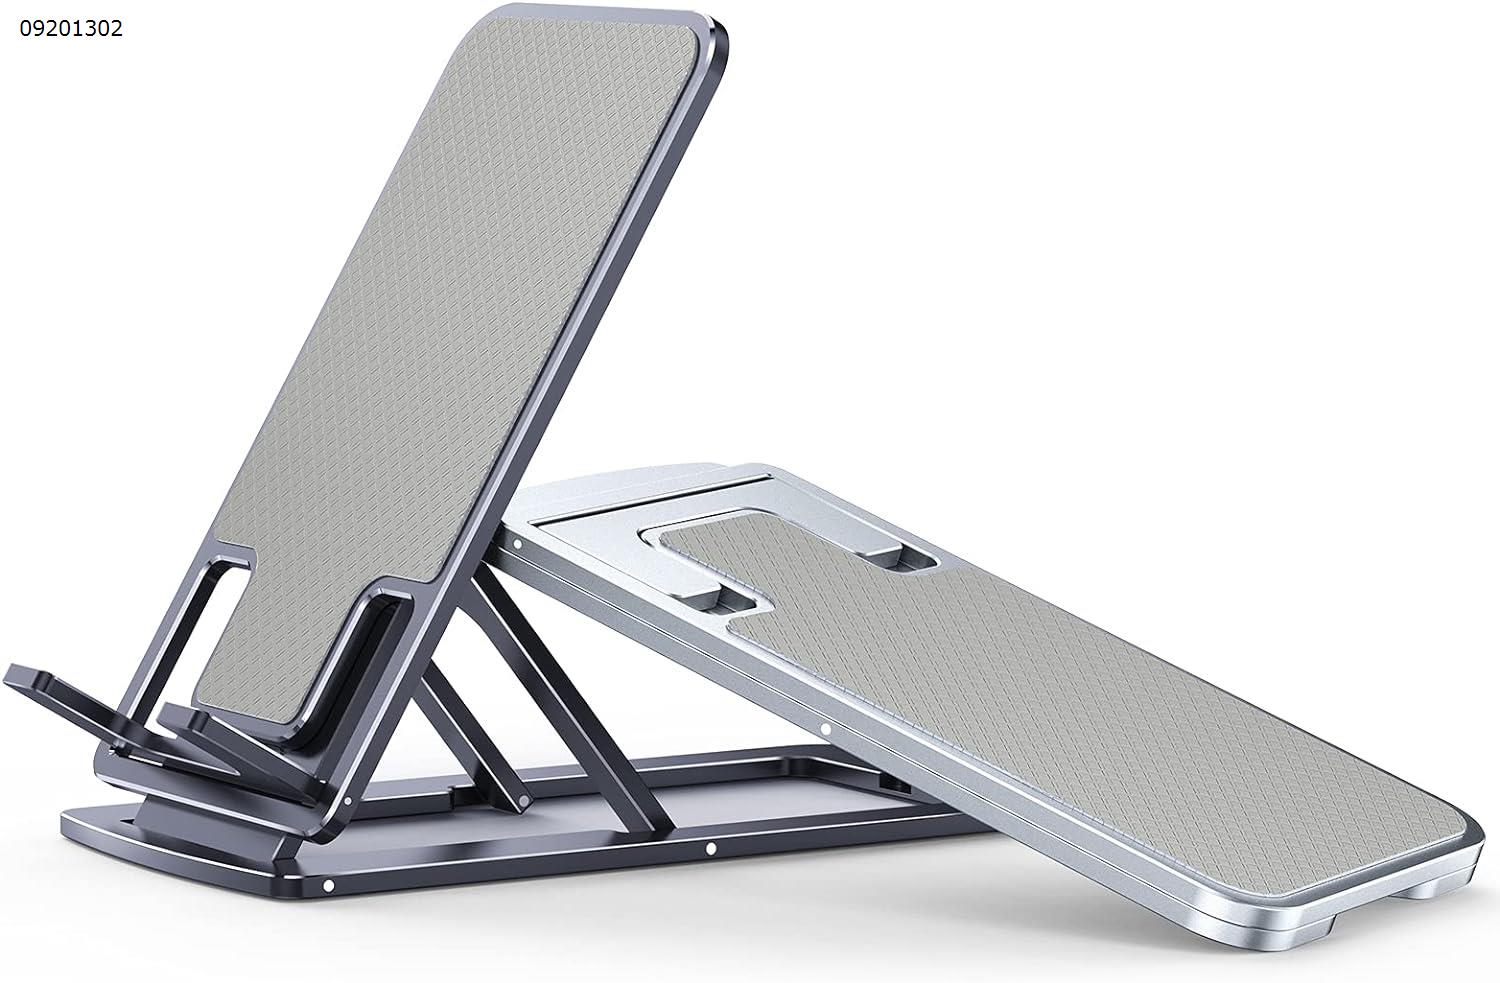 Grey Mobile Phone Stand, Table Mobile Phone Holder, Mobile Phone Holder, Table Stand, Portable Mobile Phone Stand, All Aluminium Alloy Compatible with iPhone 12 Pro Max XS, Galaxy S20 S10 up to Mobile Phone Mounts & Stands 1